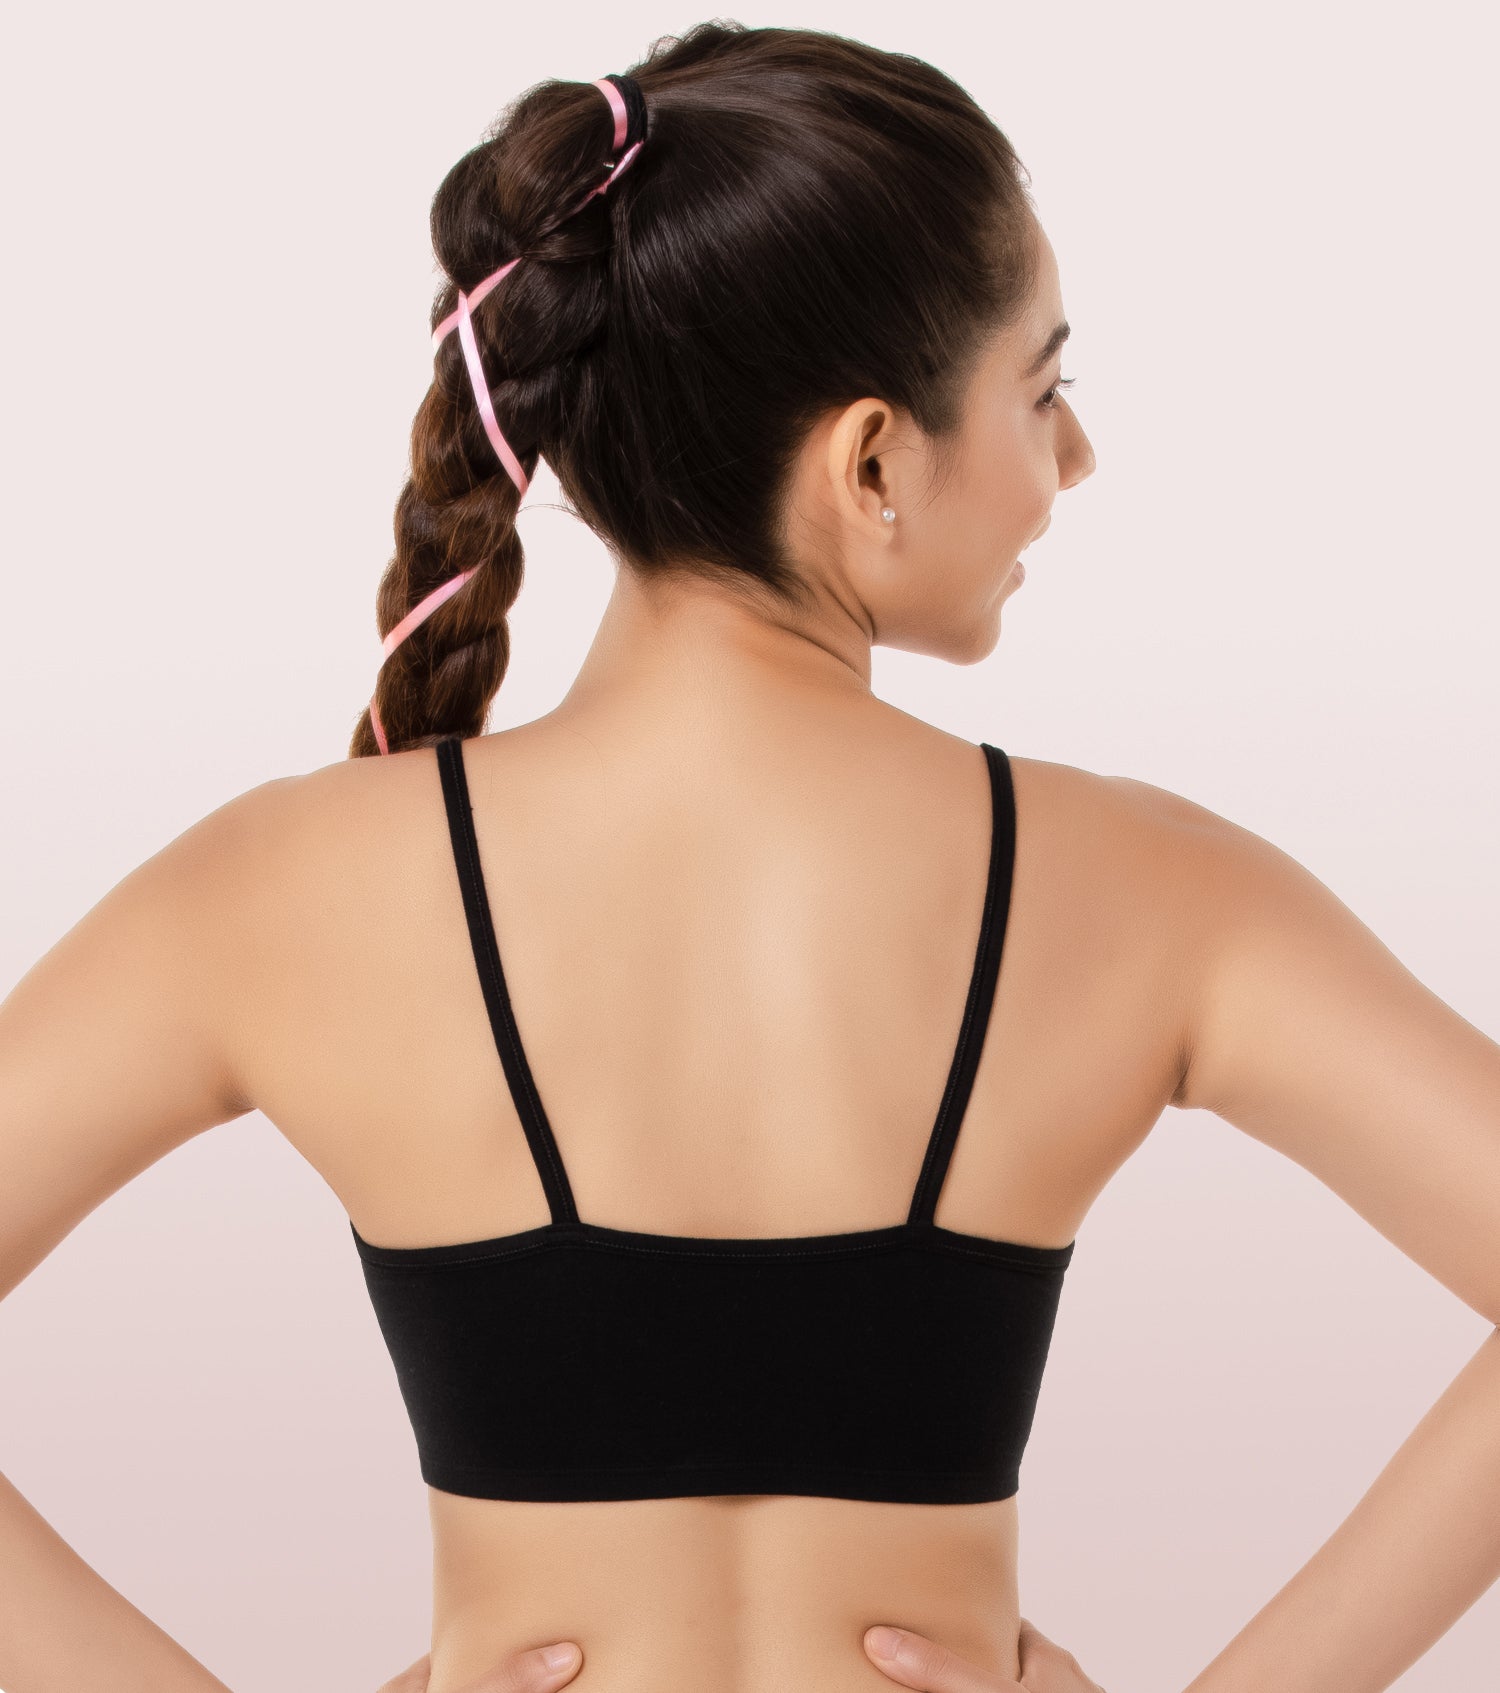 Enamor - This ultra-stretch cotton bra is here to win the award